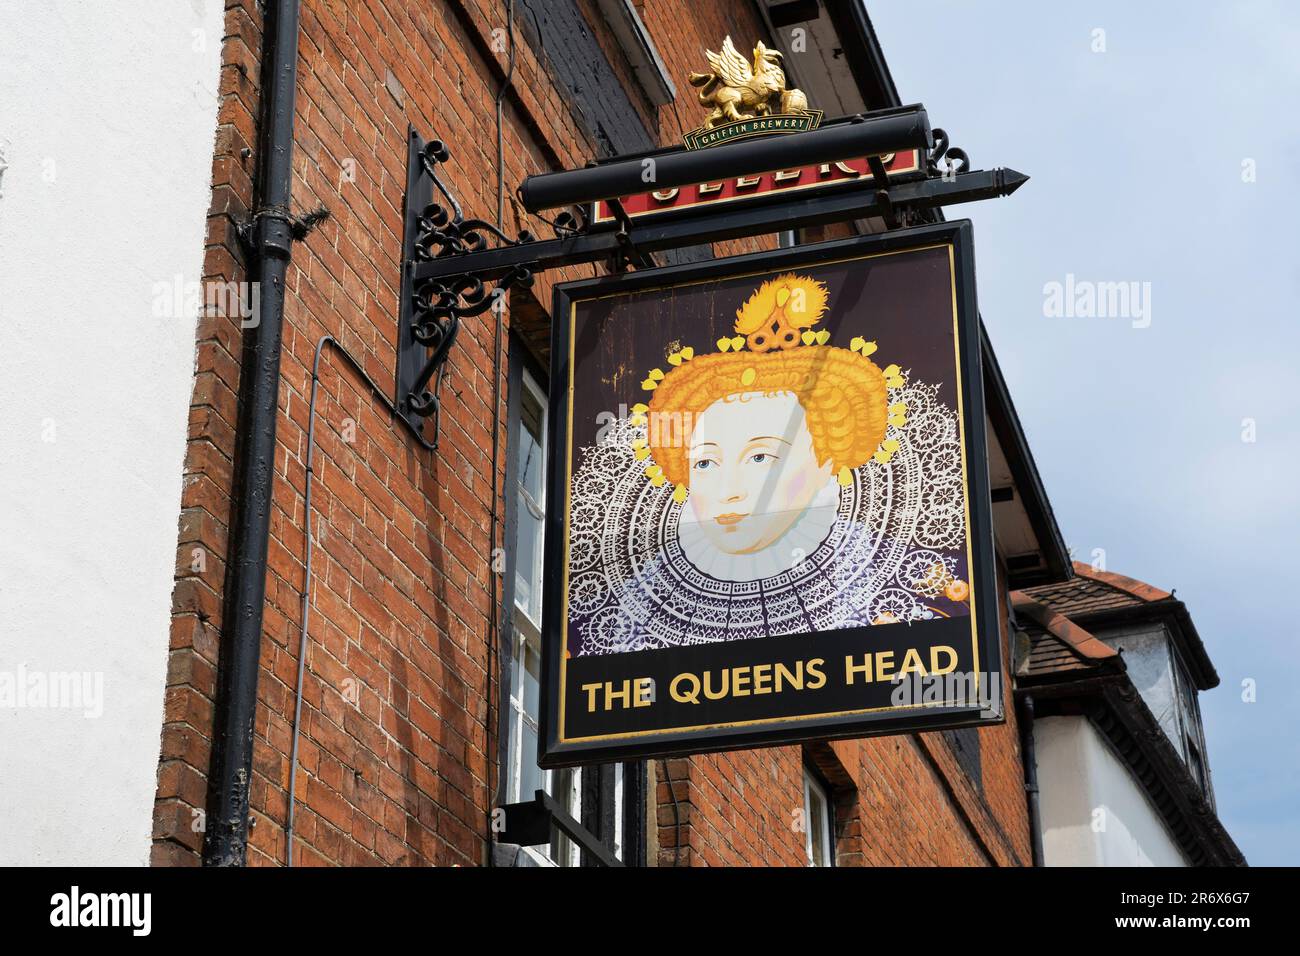 The Queen's Head - a traditional red brick pub on the Borough in Farnham, with a hanging sign outside with a likeness of Queen Elizabeth First. UK Stock Photo